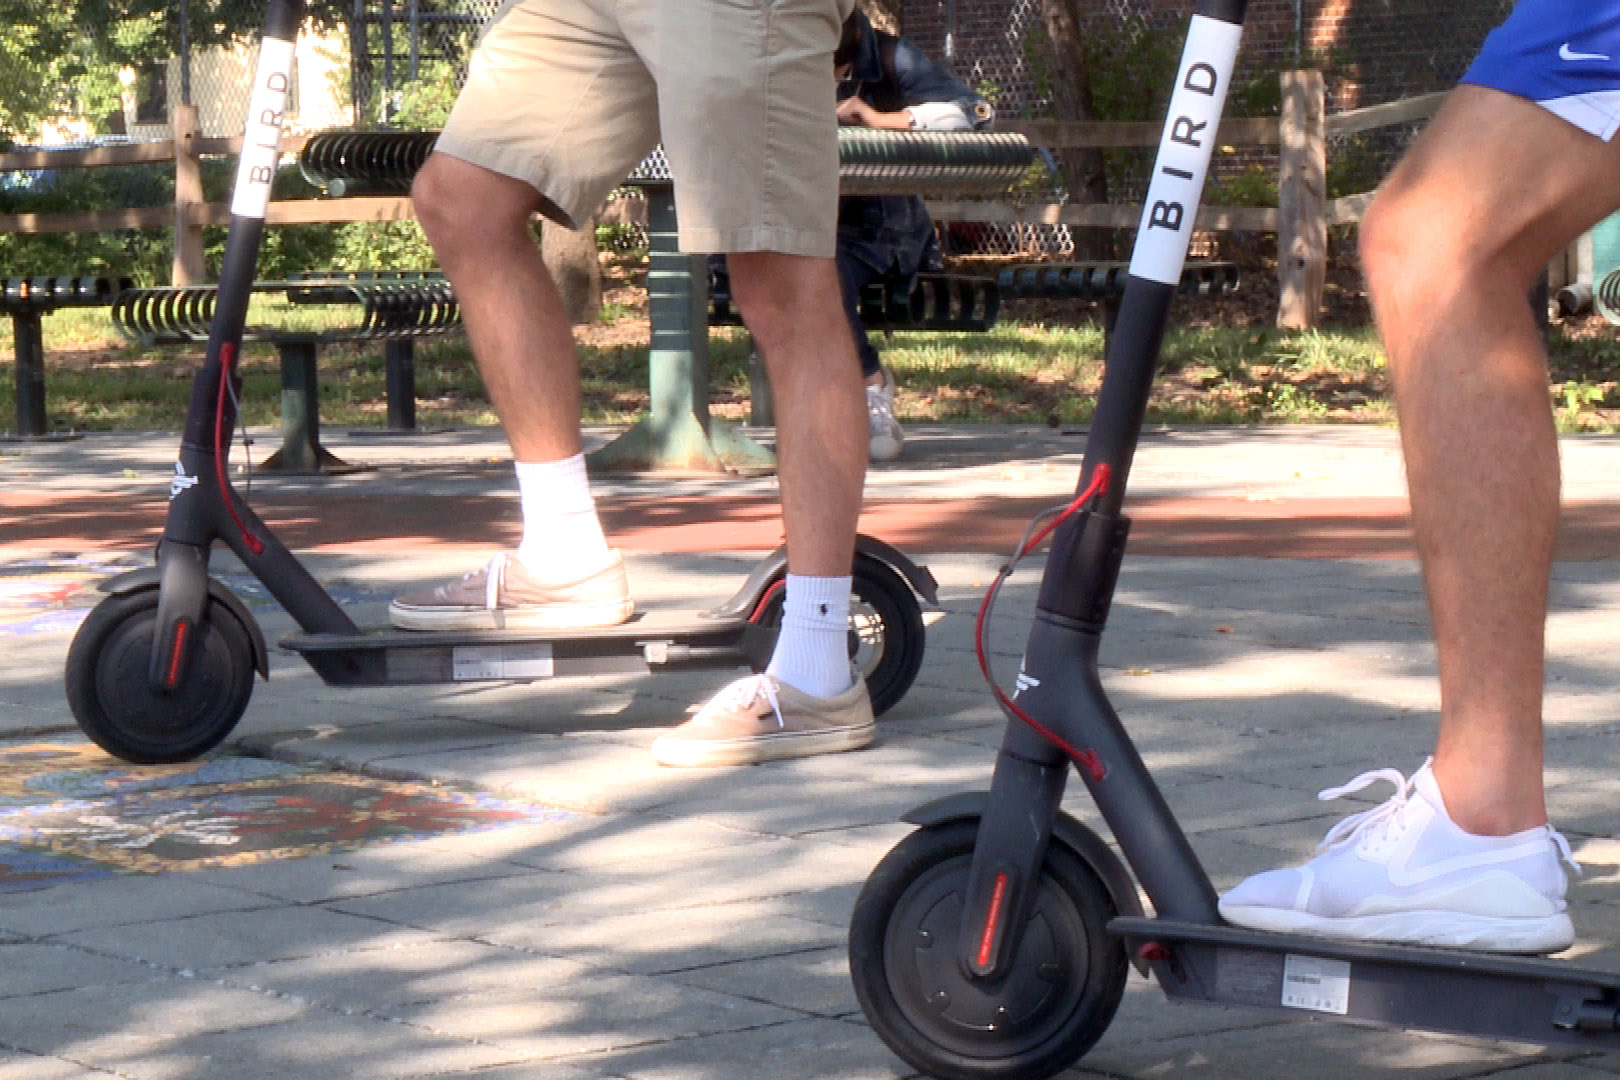 Two bird scooters in a city park